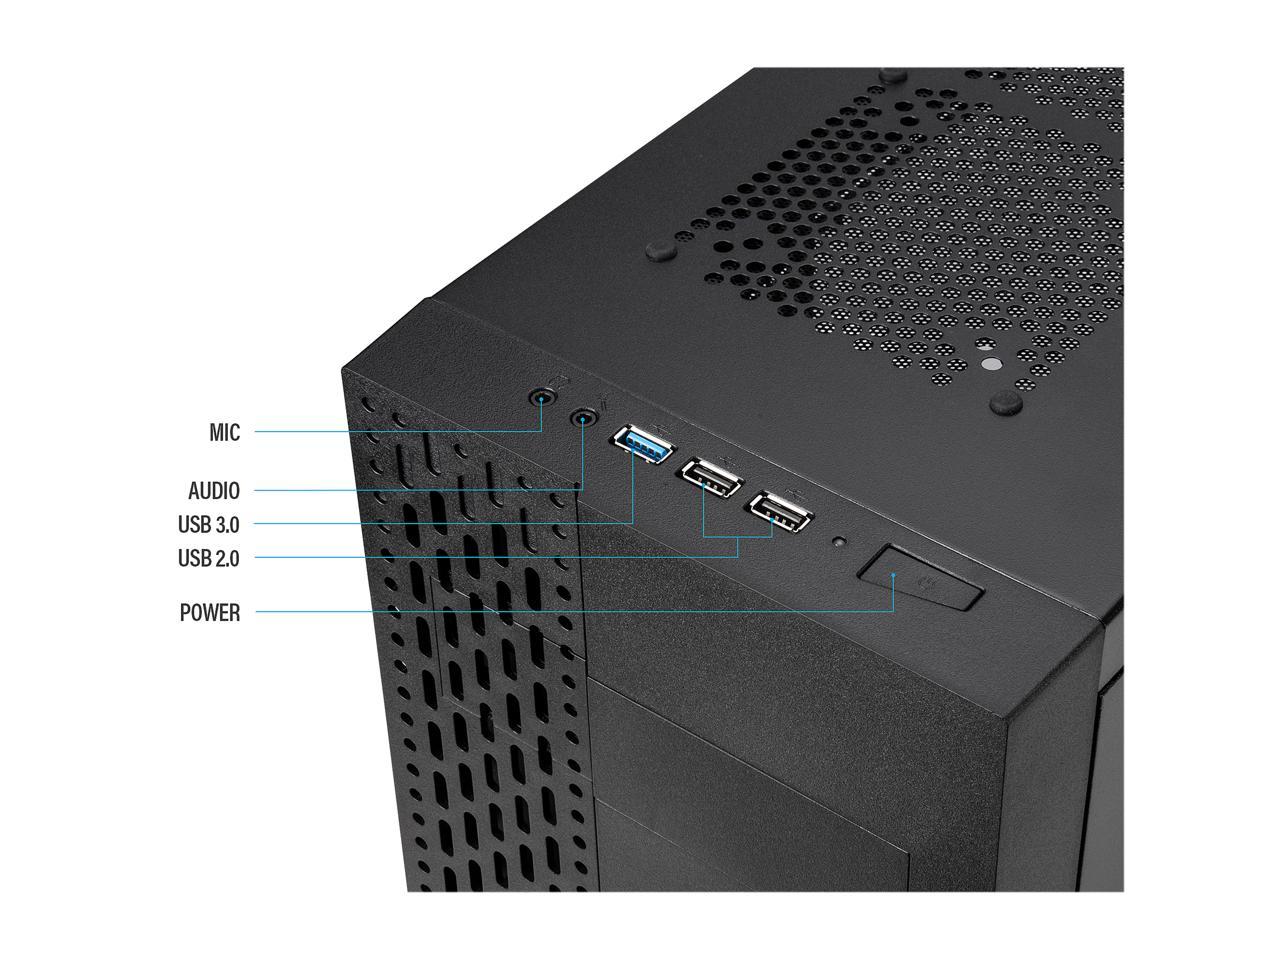 Rosewill Atx Mid Tower Gaming Computer Case, Supports Up To 400 Mm Long Vga Card Tyrfing